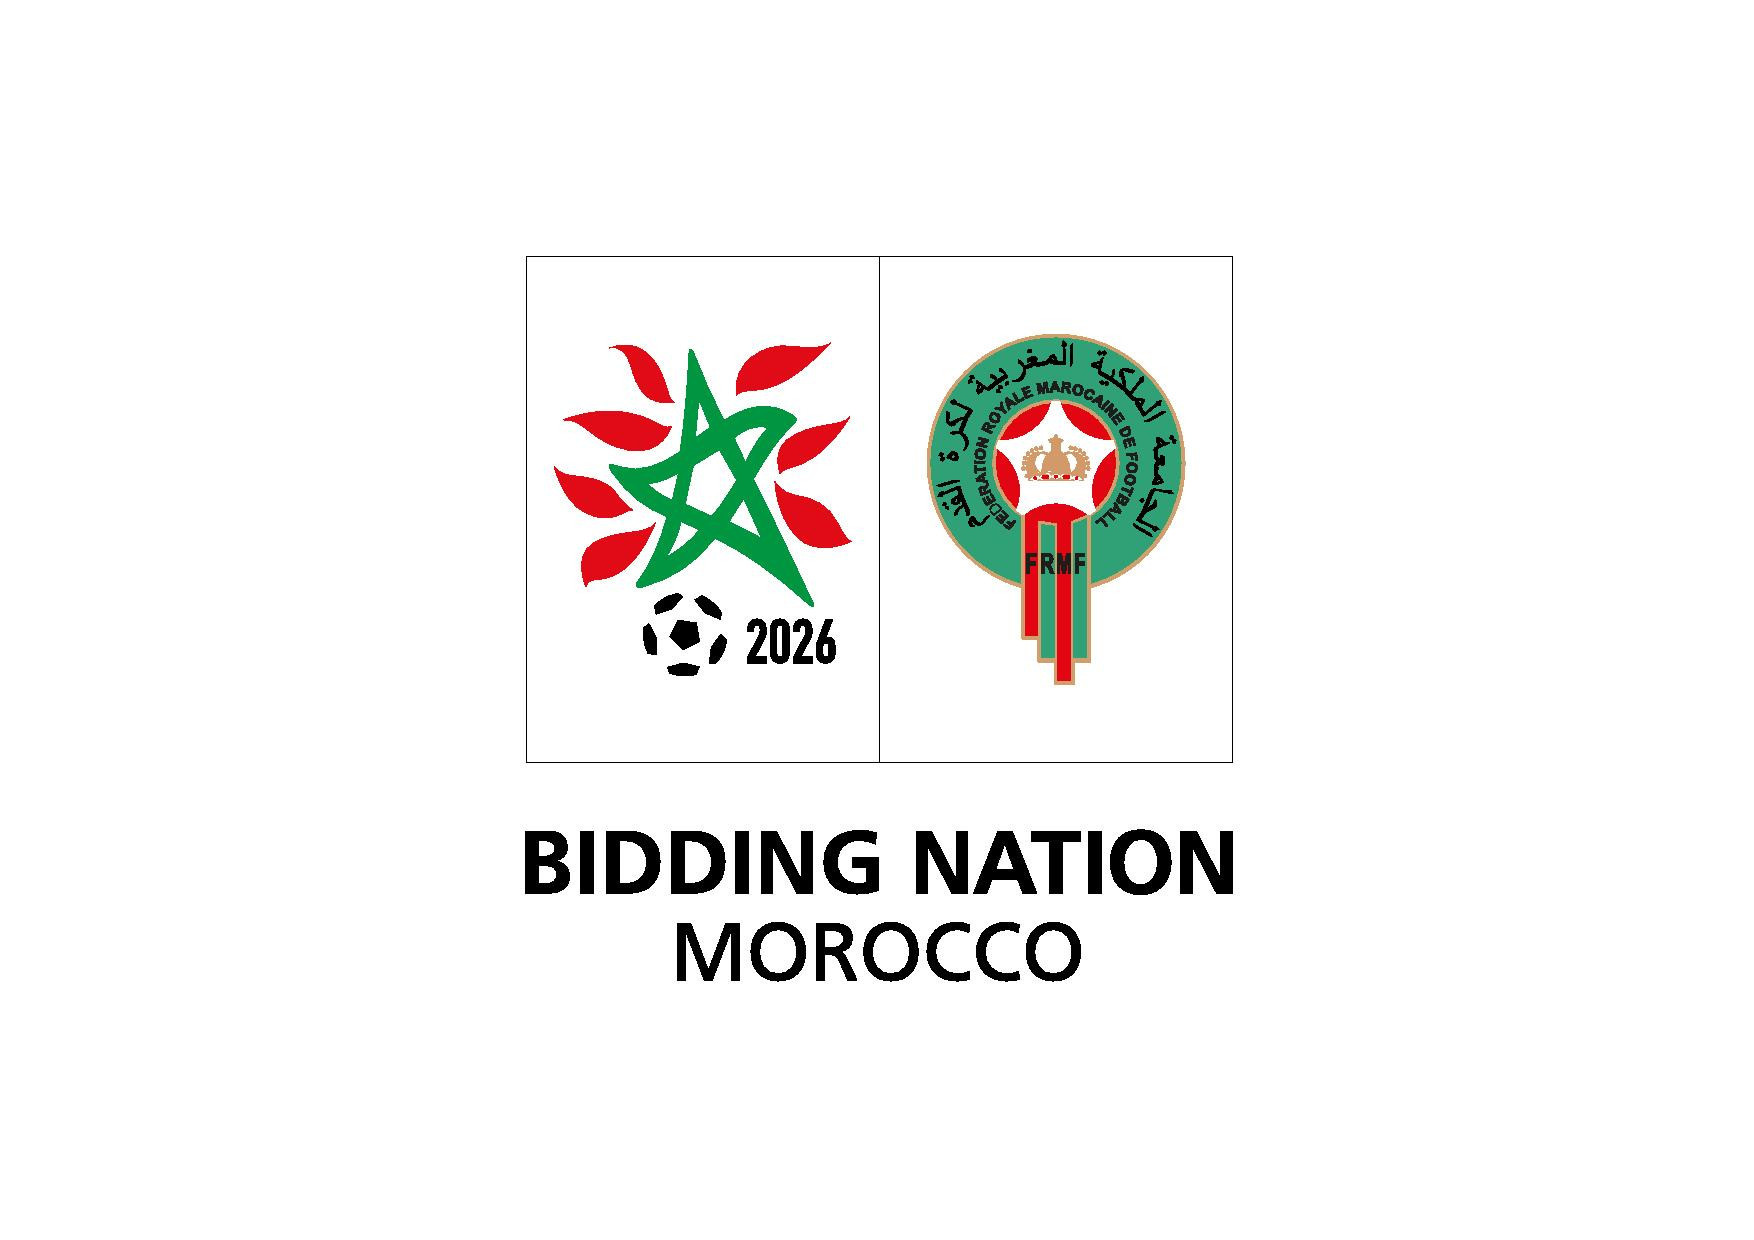 Morocco 2026 unveil bid team and logo with just over four months until FIFA select World Cup host